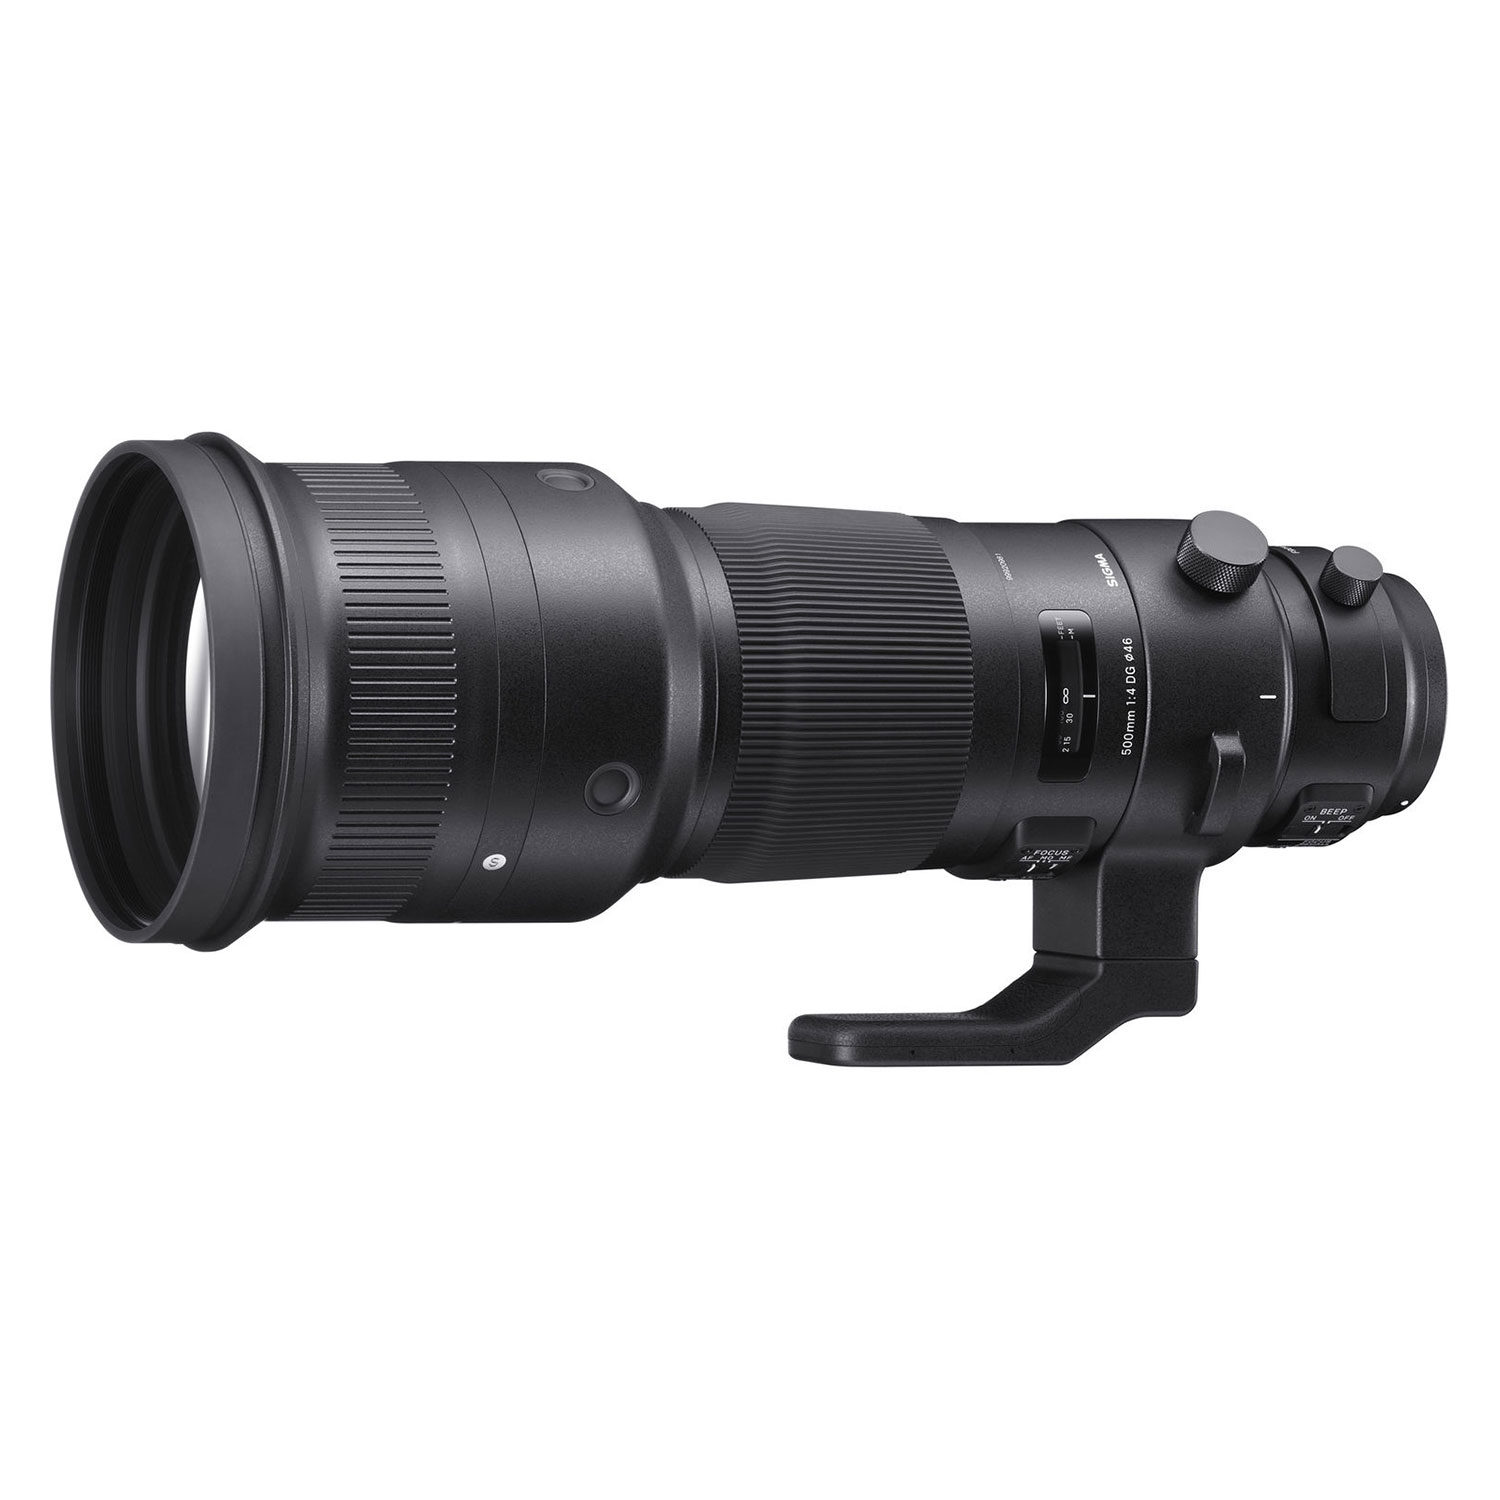 Image of Sigma 500mm f/4 DG OS HSM Canon